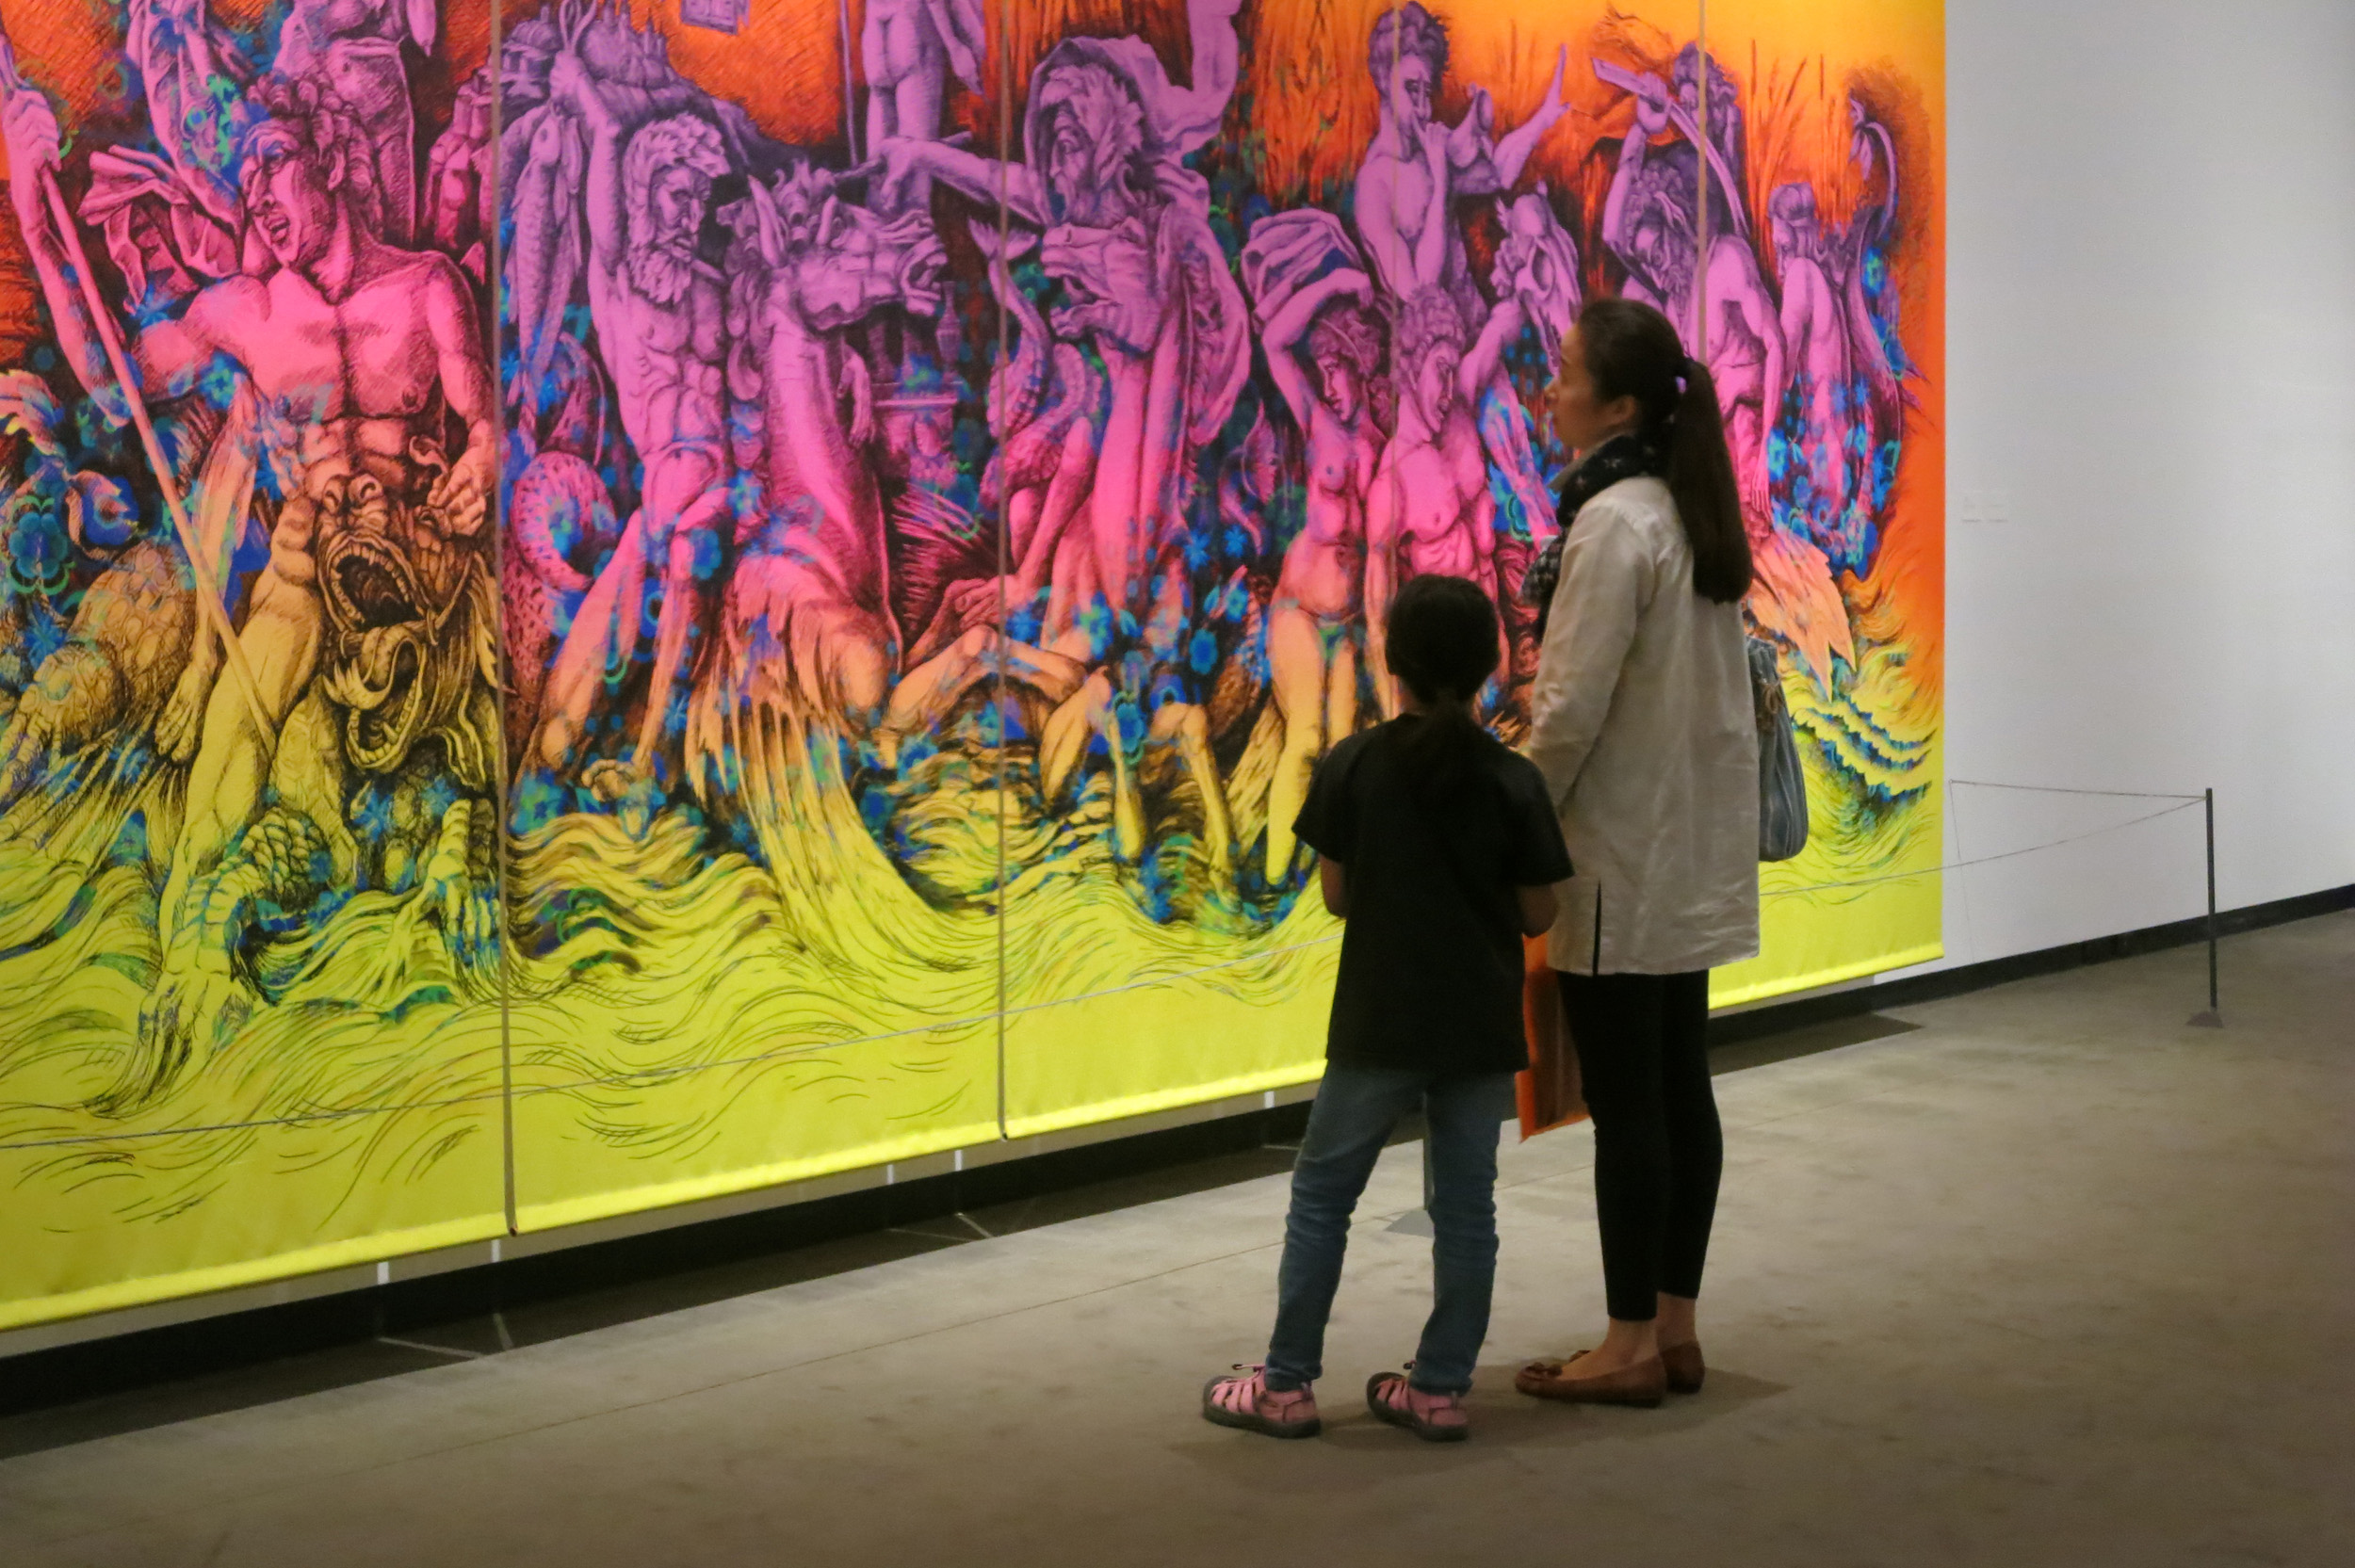 Mother and child looking at brightly colored artwork